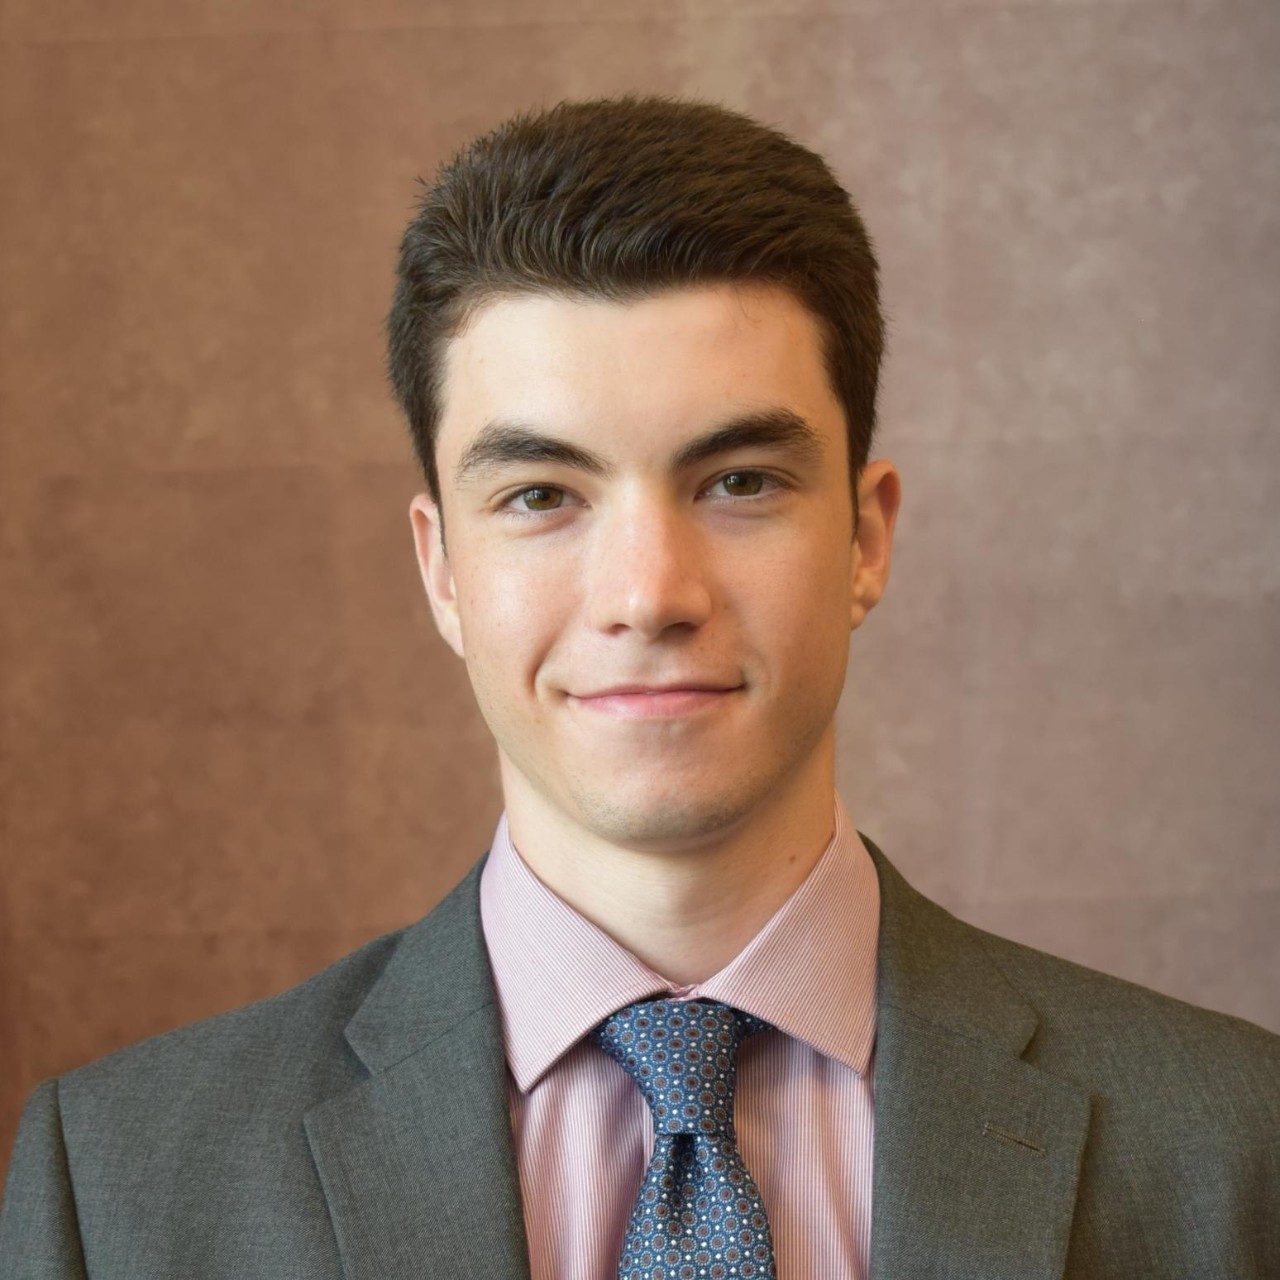 Clement has worked with the National Academy of Sciences on the Board of Army Research and Development. Additionally, he completed research with Dr. Stivachtis on two projects, including a paper on Organized Crime in the European Union. Clement plans to attend law school. 